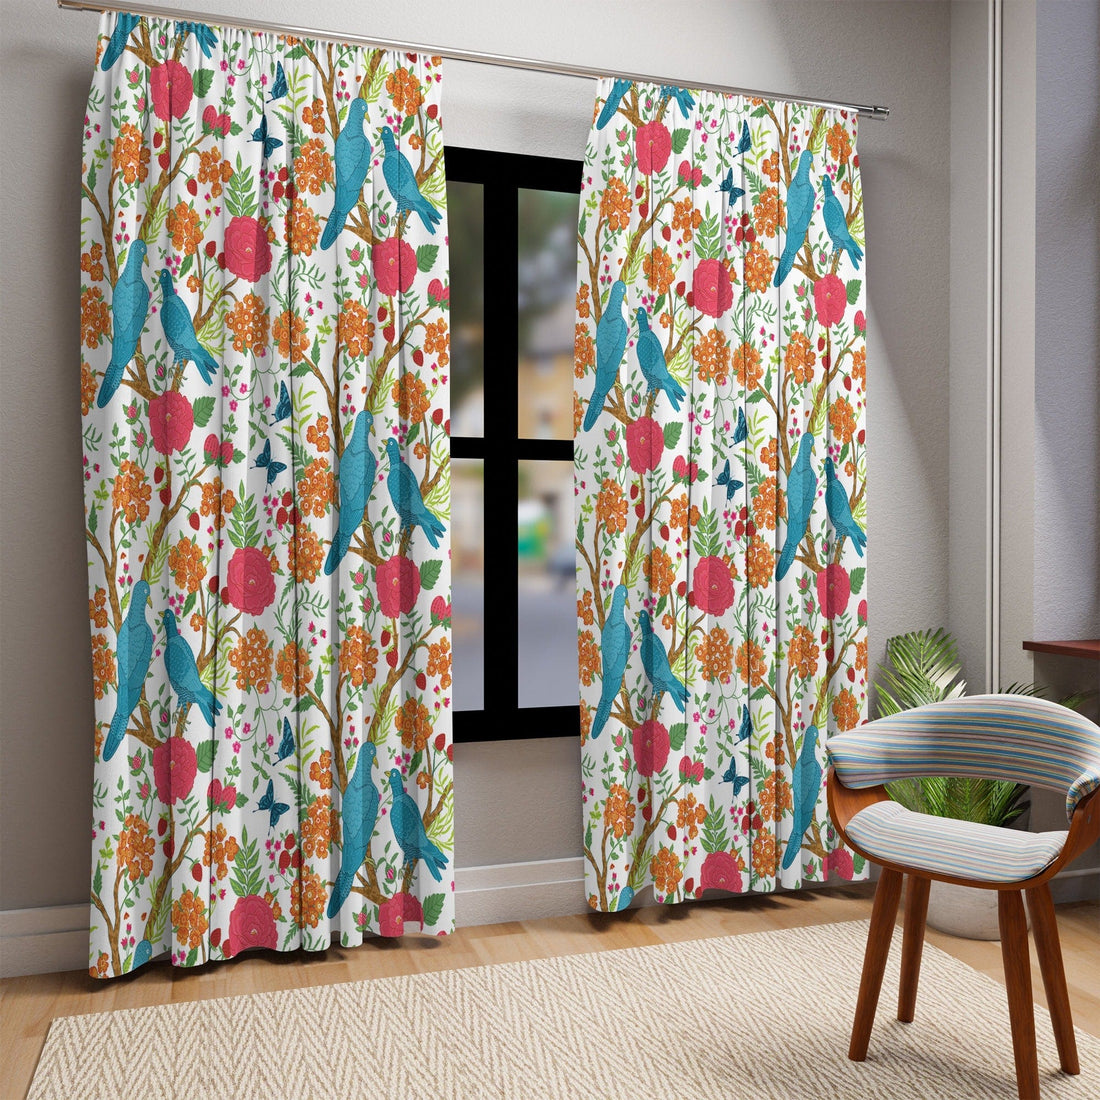 Kate McEnroe New York Chinoiserie Floral and Exotic Bird Botanical Garden Curtains in Pink, Green, Orange and Blue by Kate McEnroe New York - KM13809923Window CurtainsW3S - CHI - MON - SH1